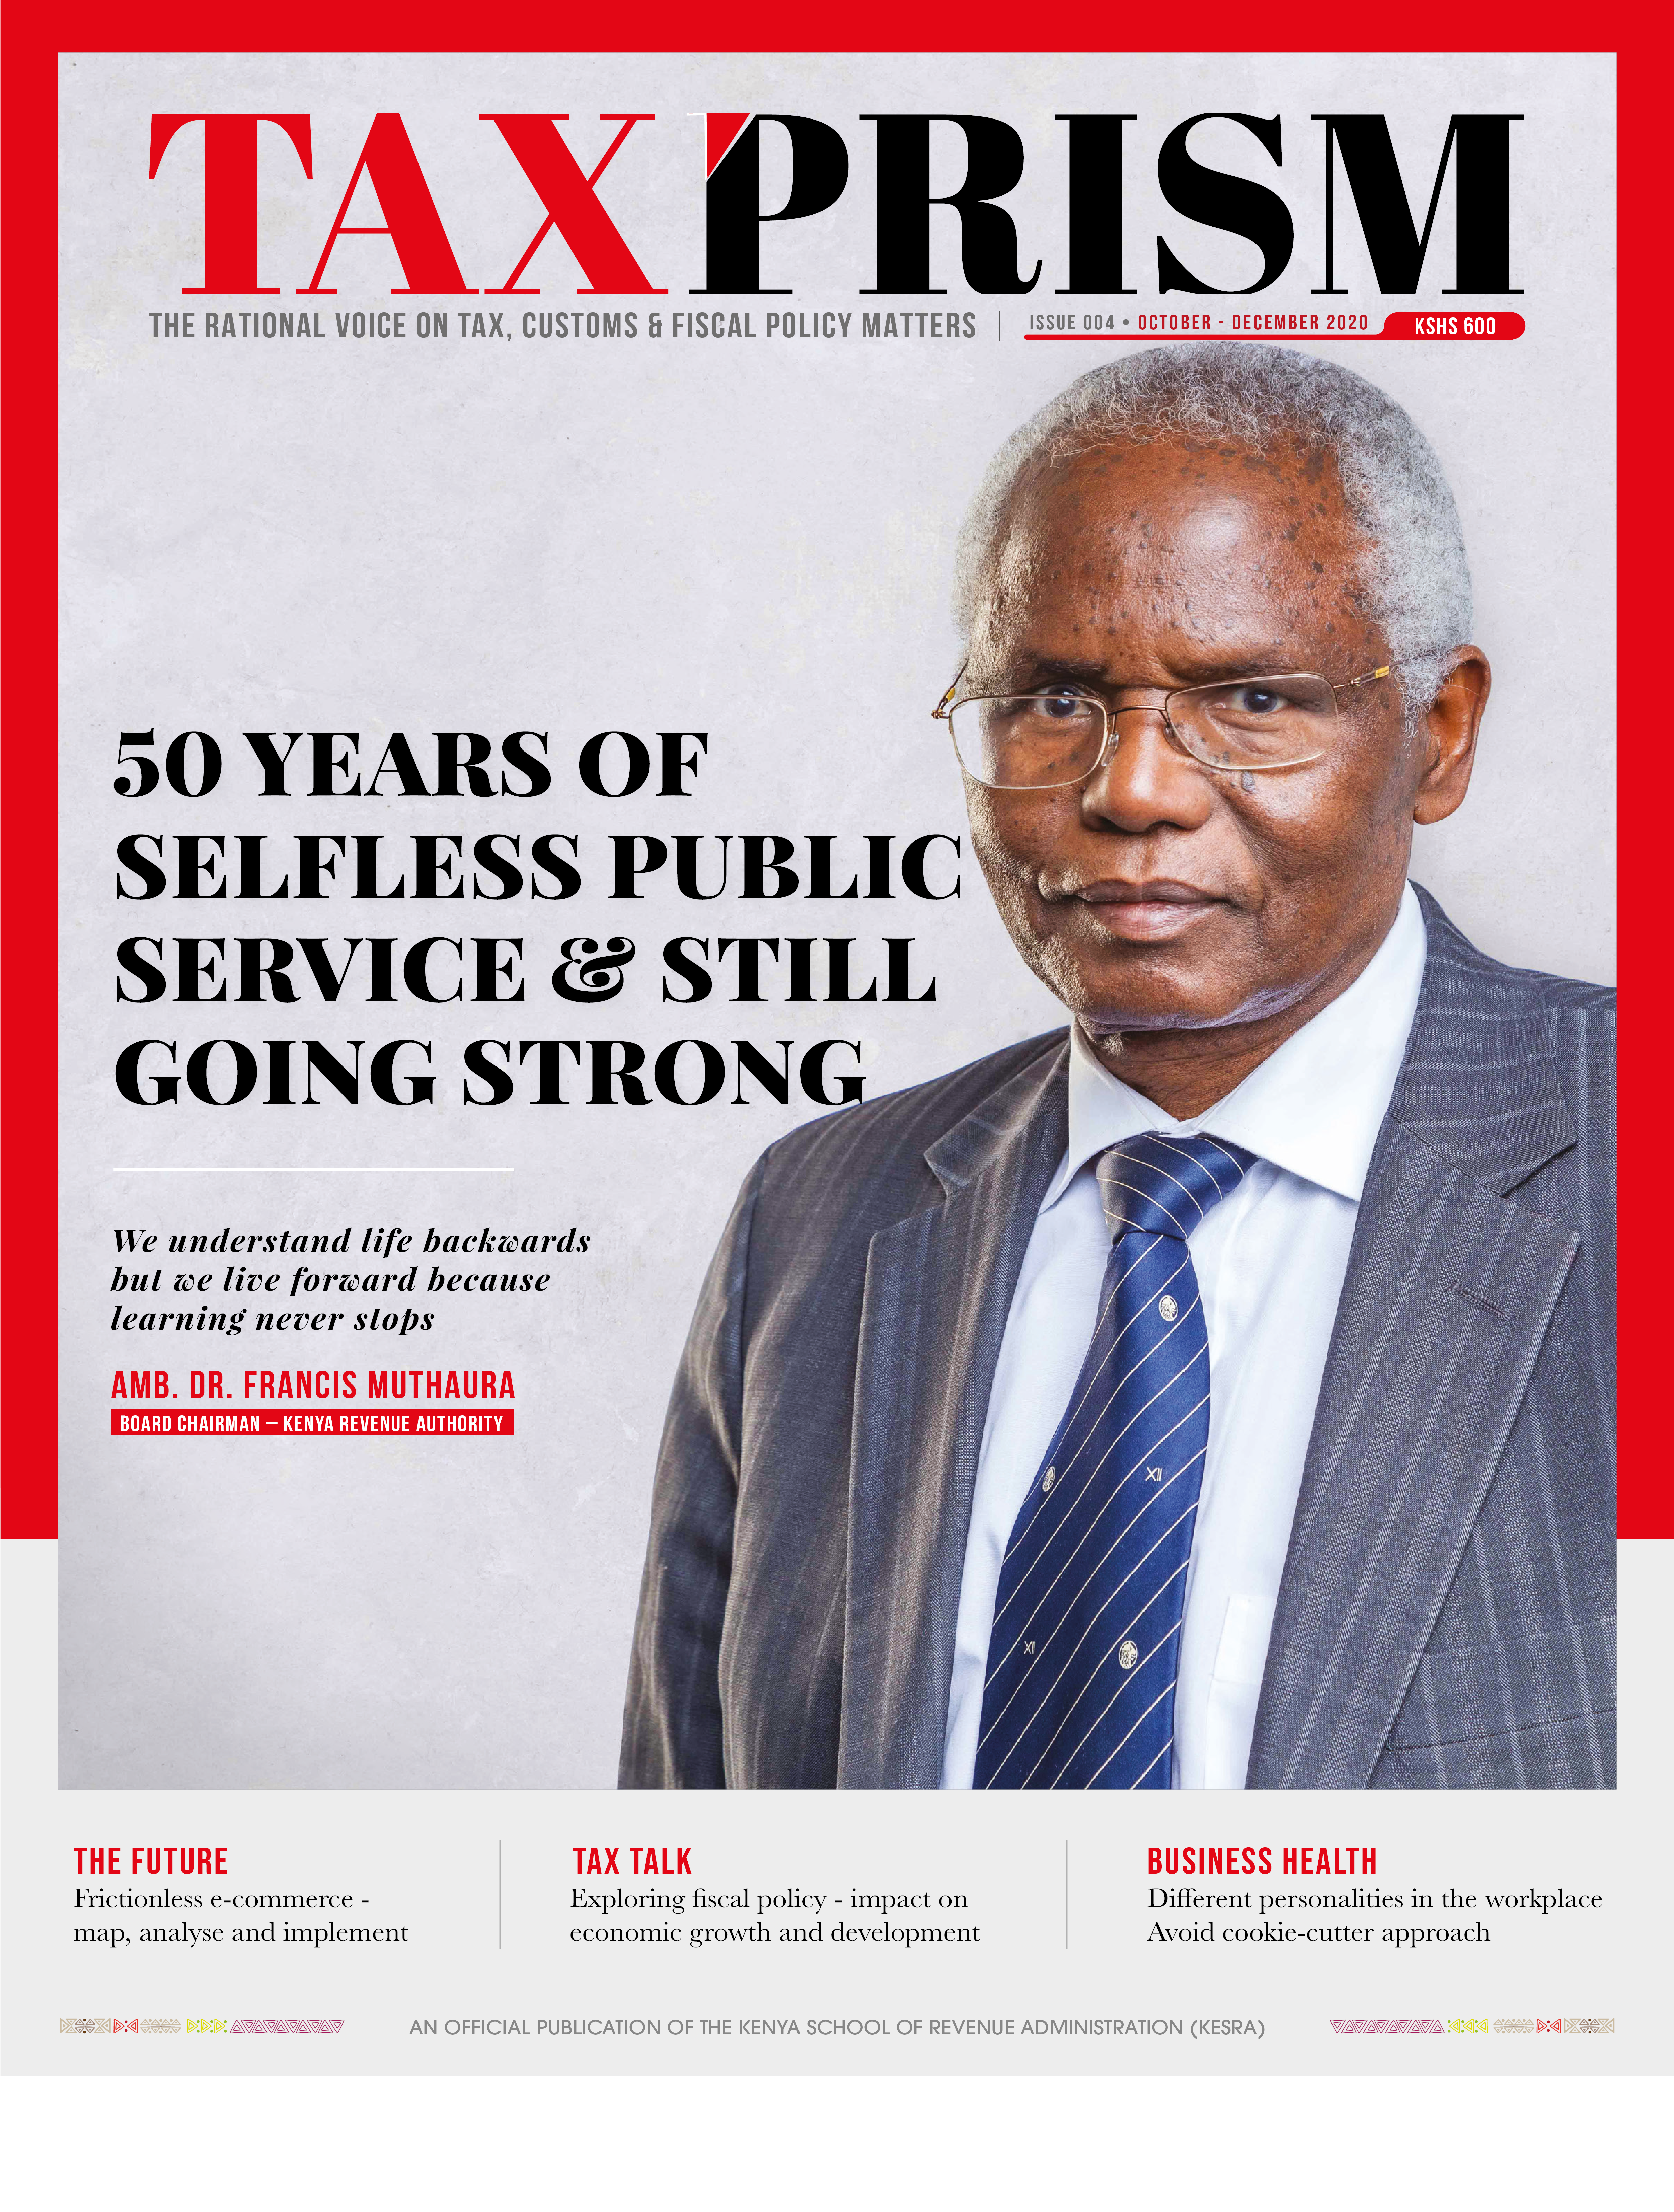 You are currently viewing 50 YEARS OF SELFLESS PUBLIC SERVICE & STILL GOING STRONG